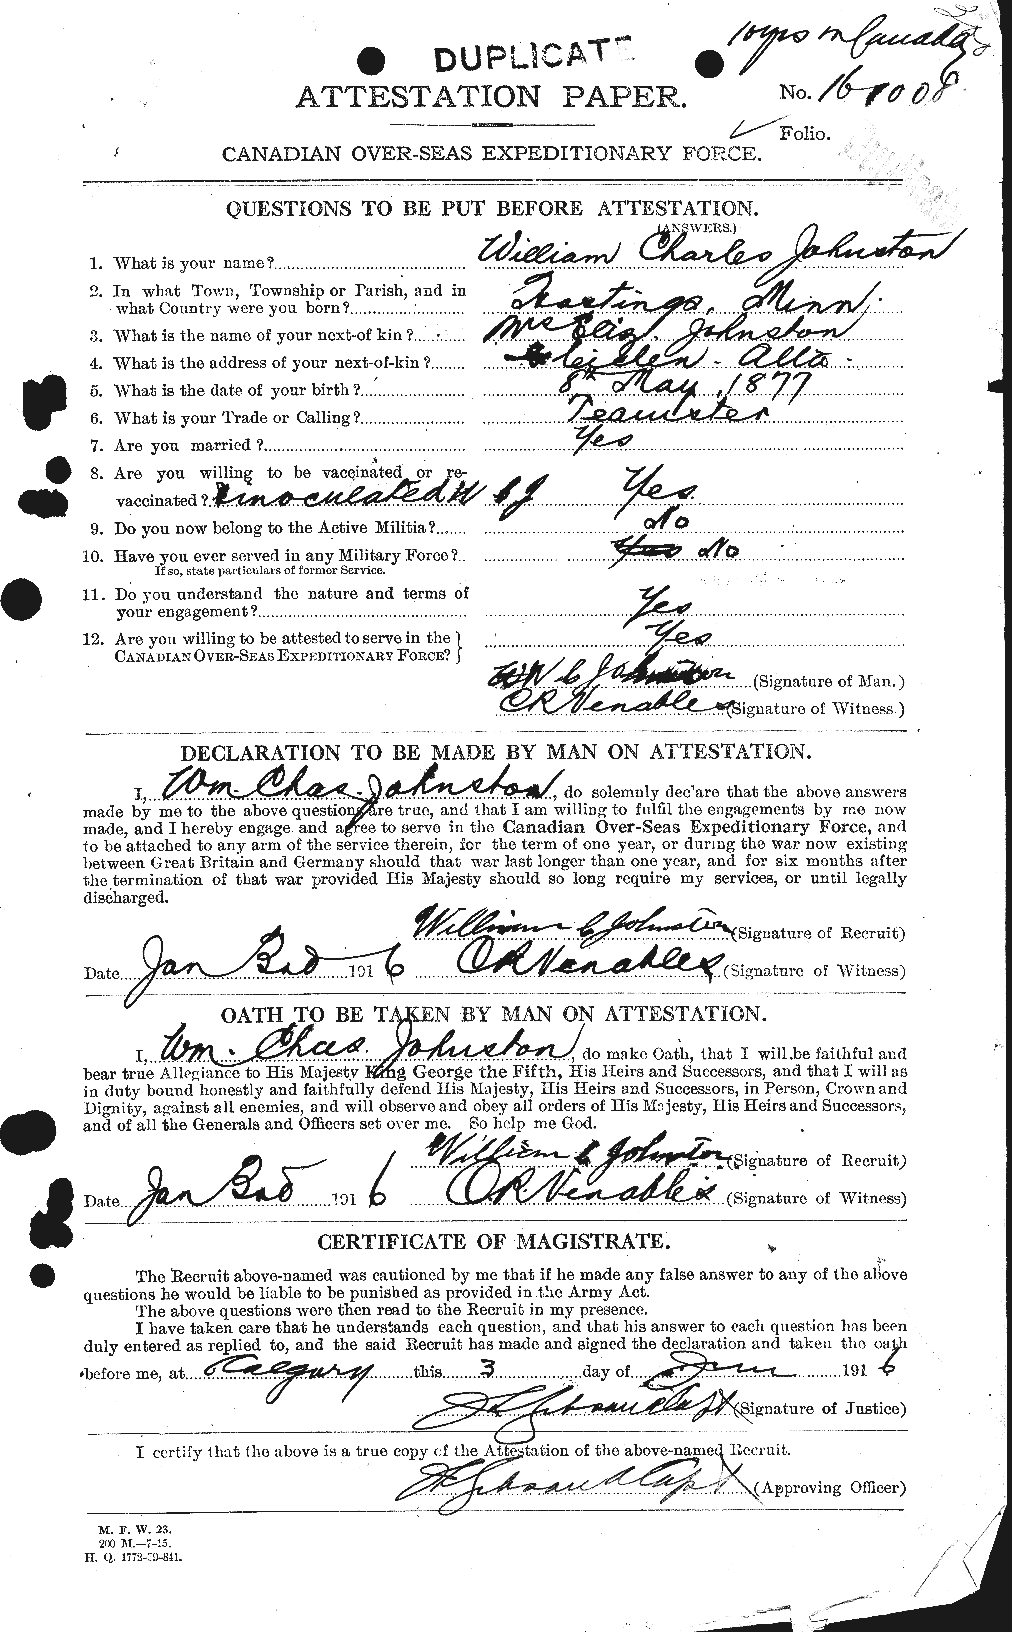 Personnel Records of the First World War - CEF 427314a